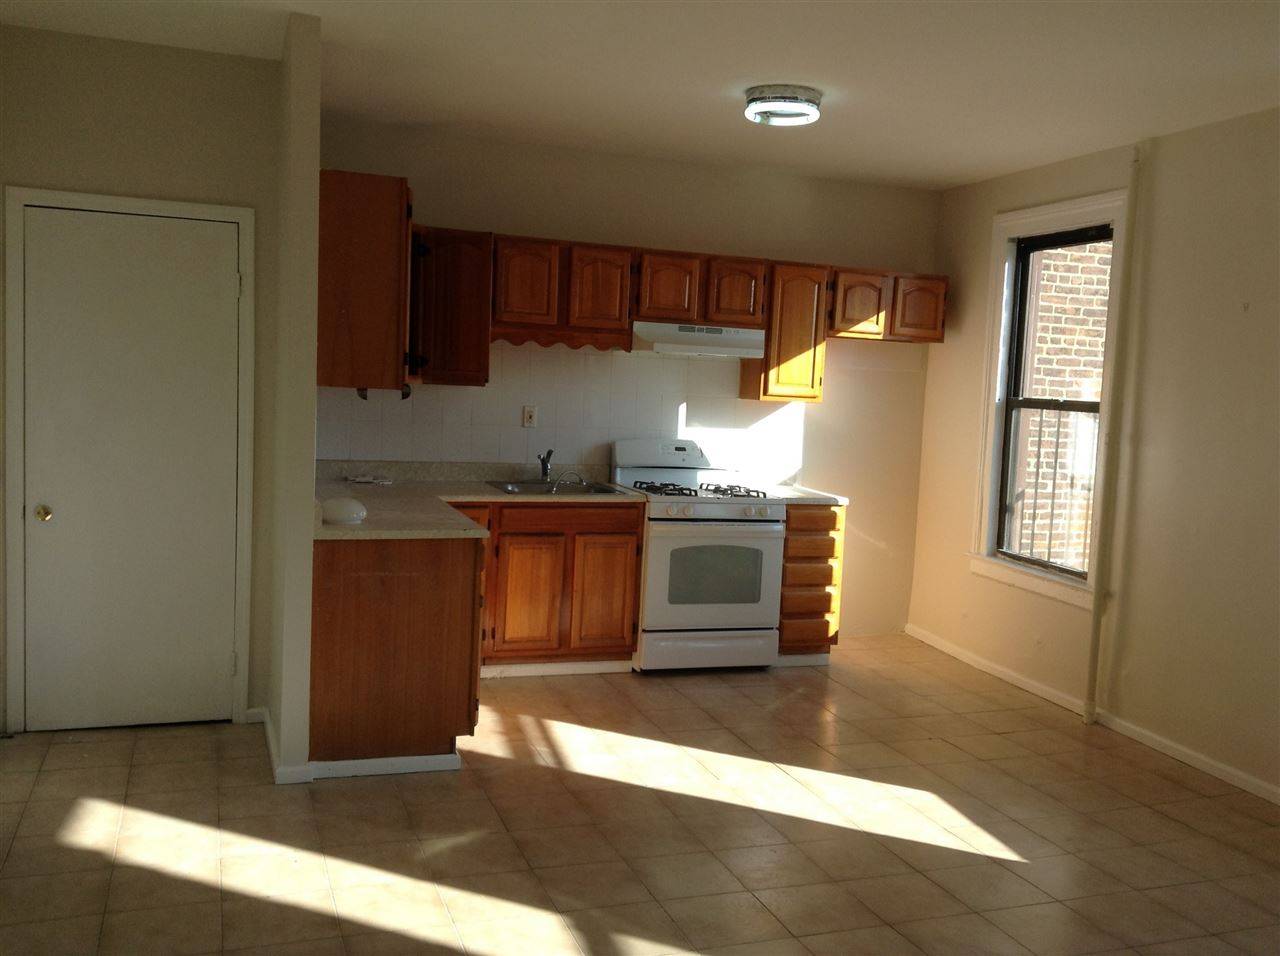 EXCELLENT LOCATION 3 BEDROOMS APARTMENT HEAT AND HOT WATER AND REFRIGERATOR WILL BE INCLUDED